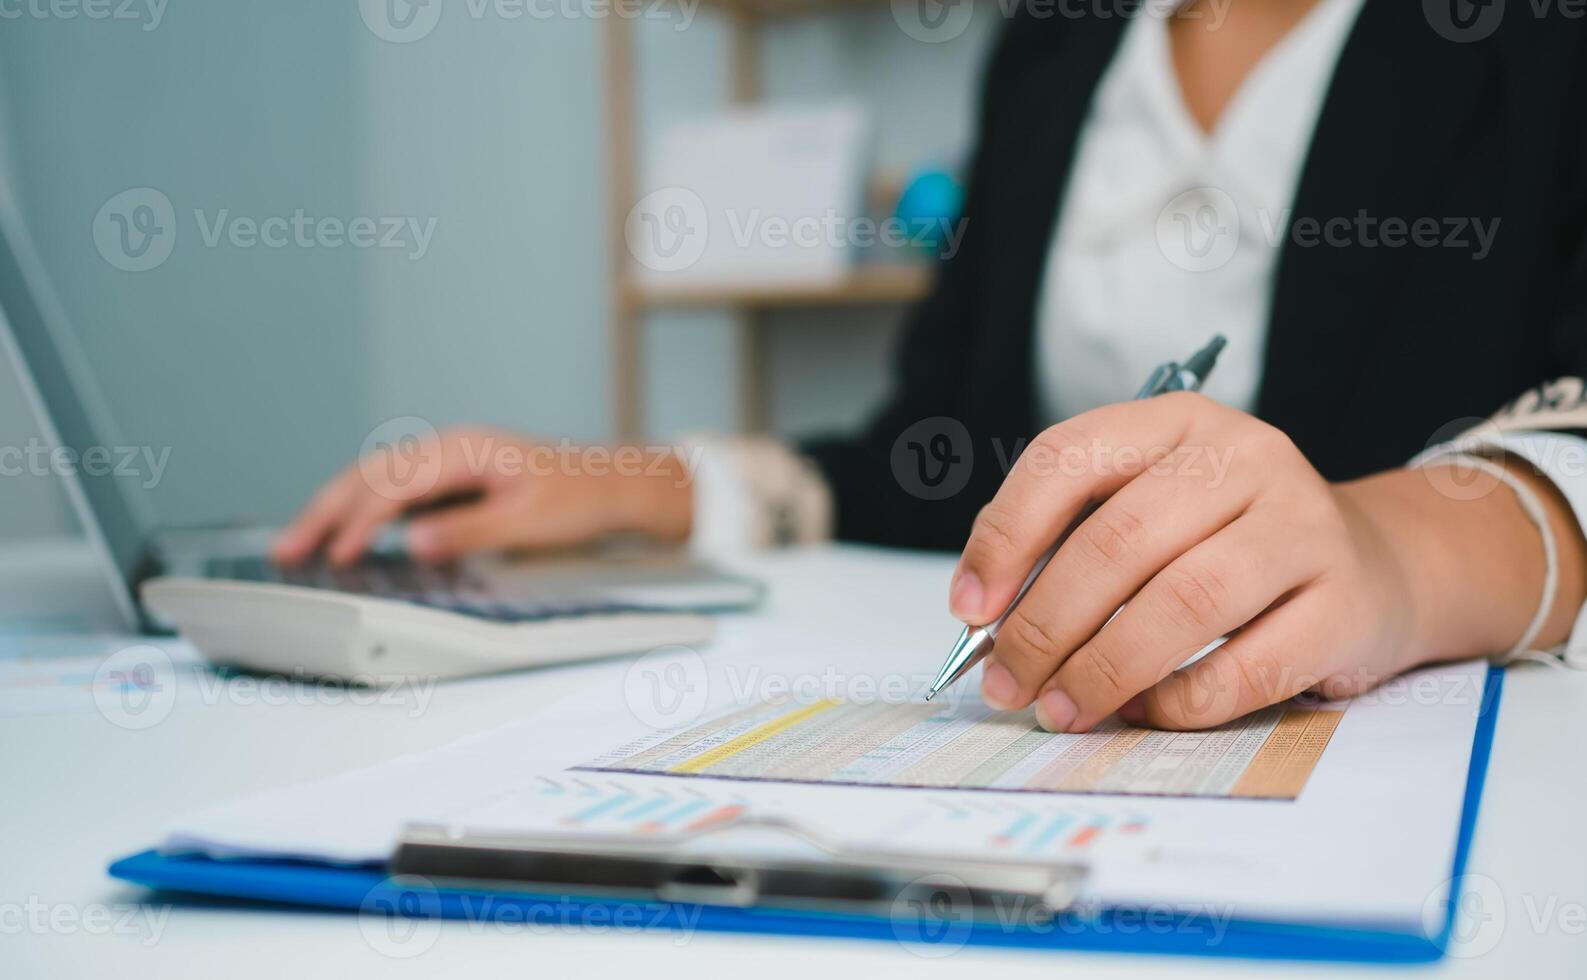 Business woman people use computers and paper documents to analyze business and manage corporate information. Business analysis with charts, indicators, and KPIs to improve organizational performance. photo